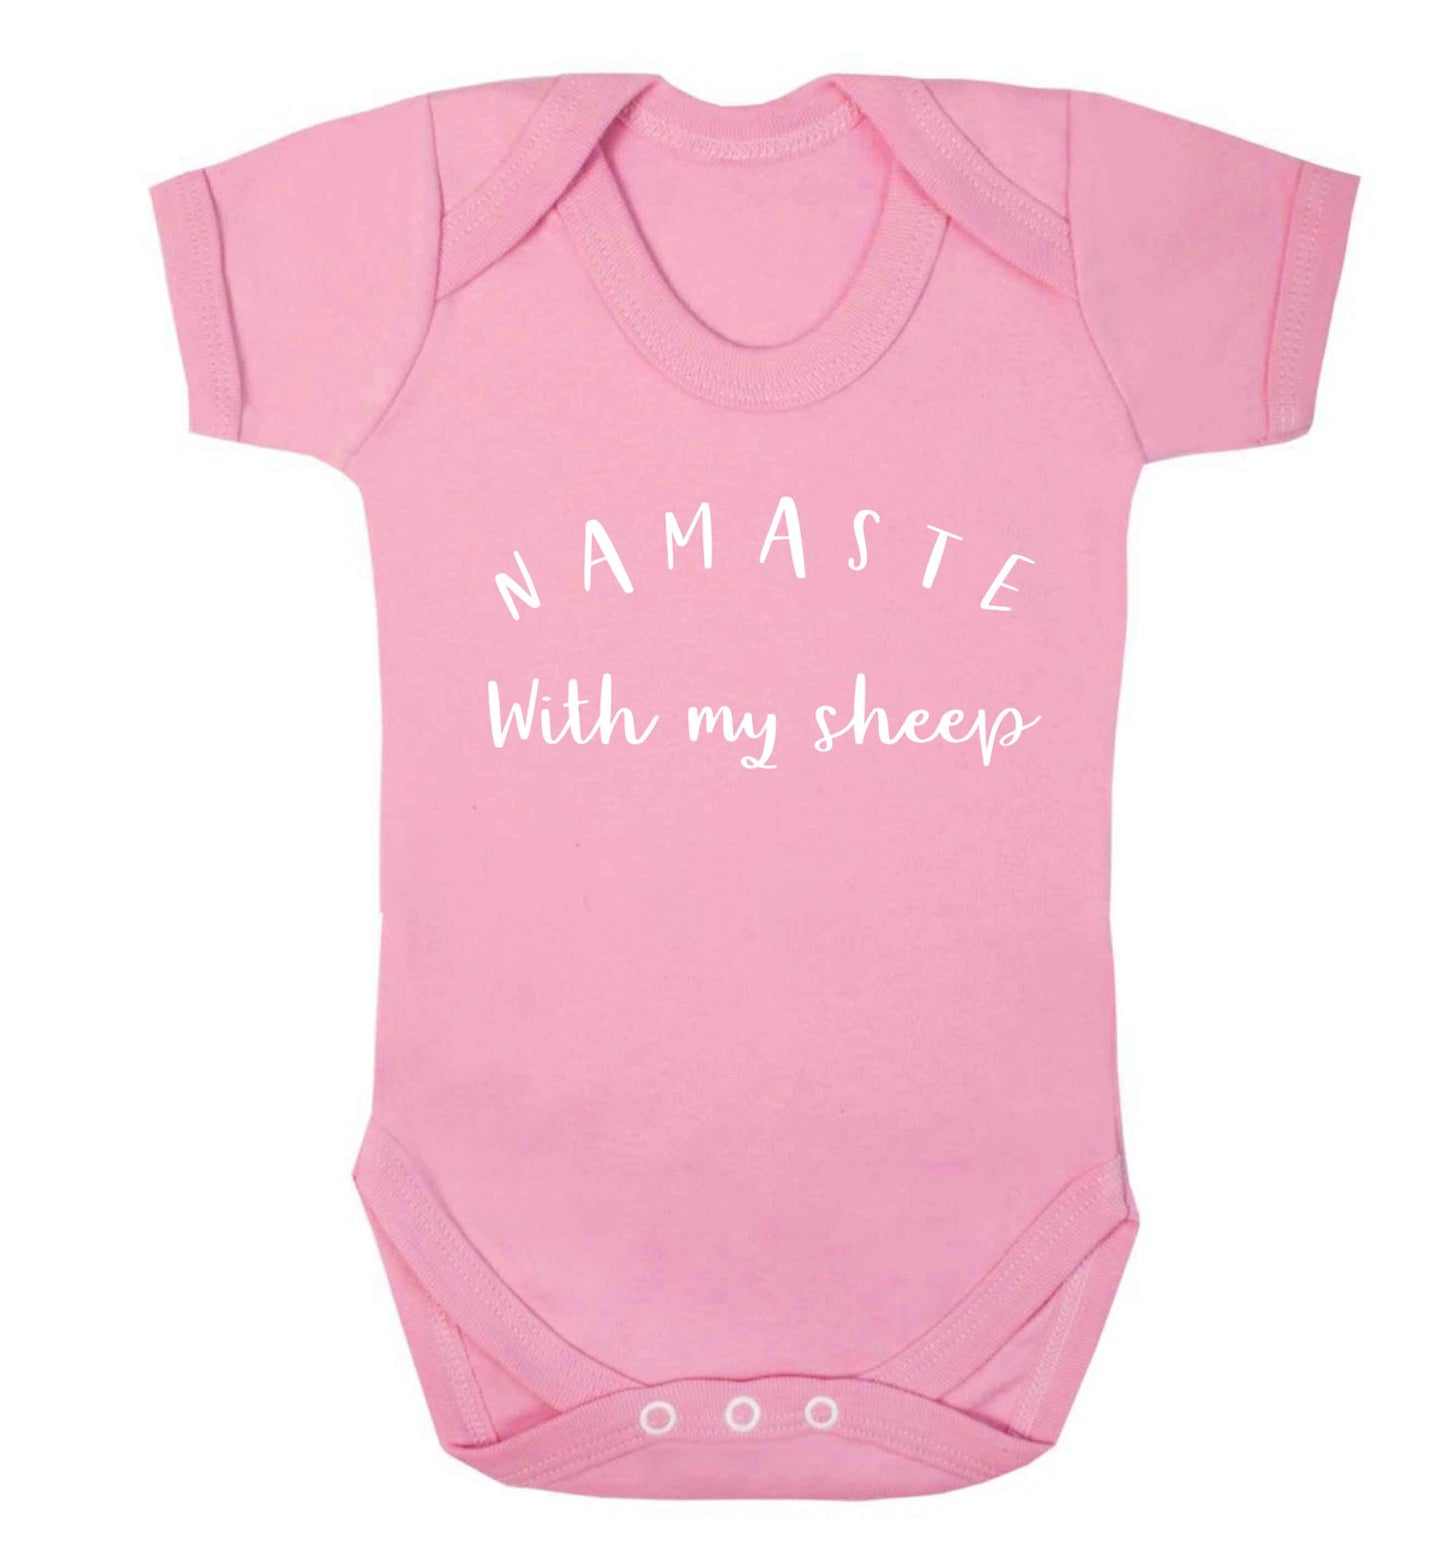 Namaste with my sheep Baby Vest pale pink 18-24 months